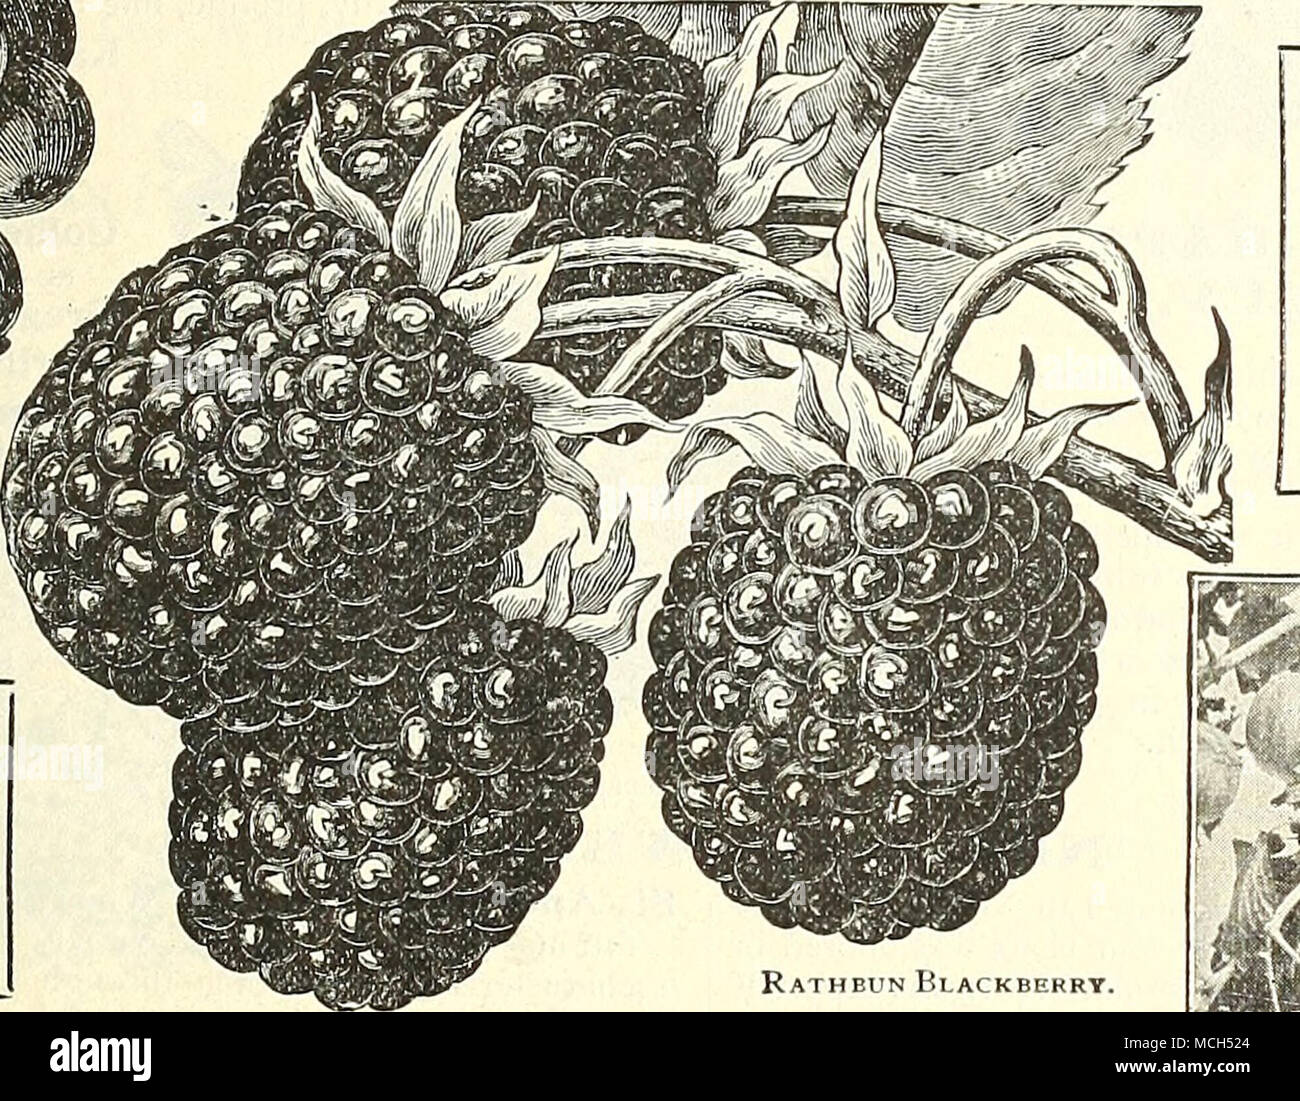 . Books on Berries. Biggle'b Berrj' Barry's Fruit Book $o Gar- 50 den, . T •50 Bailey's Fruit Grow- ing Small Fruit C I uhur- 25 ist ... I 00 Strawberry Cii Iture. I 25 Rathbun Blackberry. GOOSHBHRRIBS. of the English type; fruit large, oval, greenish-yellow, trace of mildew. 15 cts. each; $1.50 per doz.; $10.00 Gooseberries demand rich soil and good culture. One of the most successful Ameri- can growers uses a heavy manure mulch around his Gooseberry bushes during the heat of miilsummer, thus escaping mildew. We off'erstrong two-year-old plants of the following most desirable varieties : Colu Stock Photo